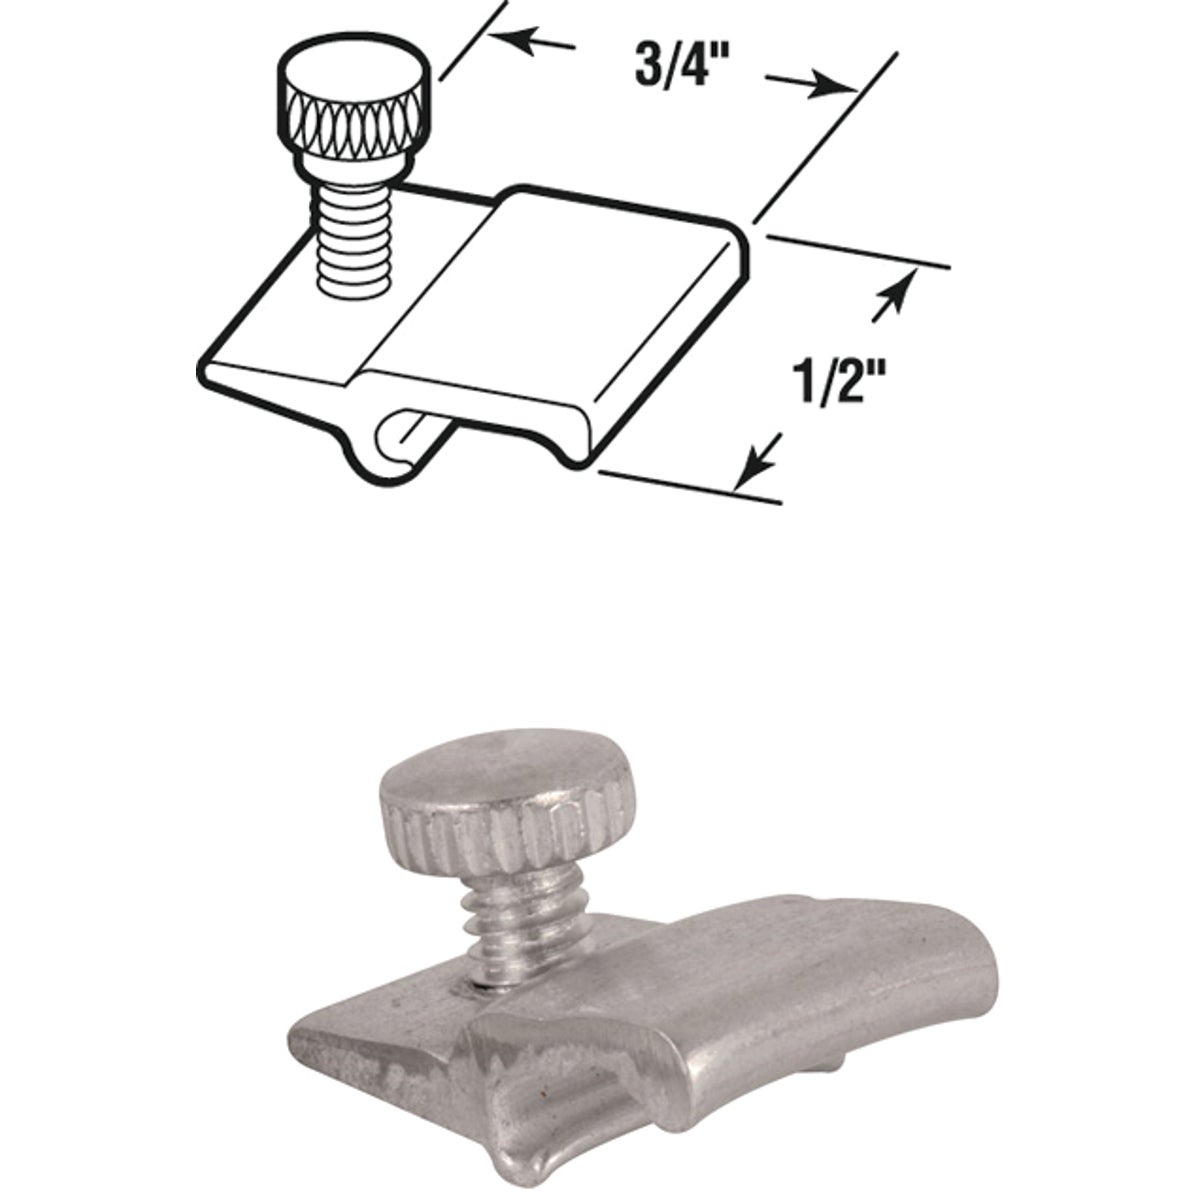 Item 268046, These are extruded aluminum clips used to attach storm windows or screen 